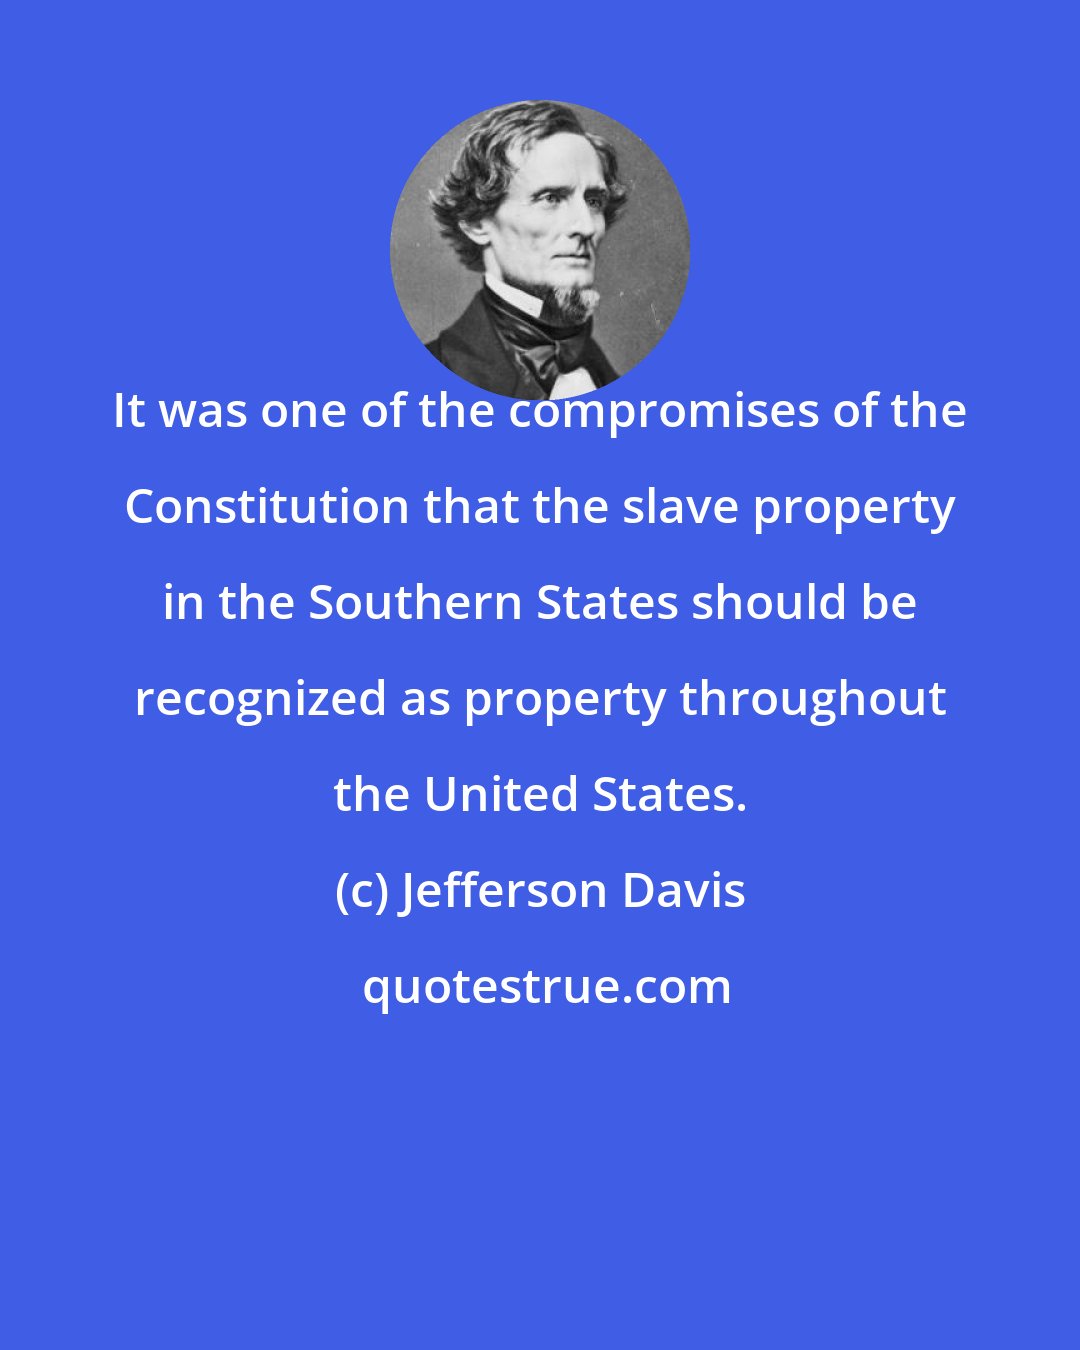 Jefferson Davis: It was one of the compromises of the Constitution that the slave property in the Southern States should be recognized as property throughout the United States.